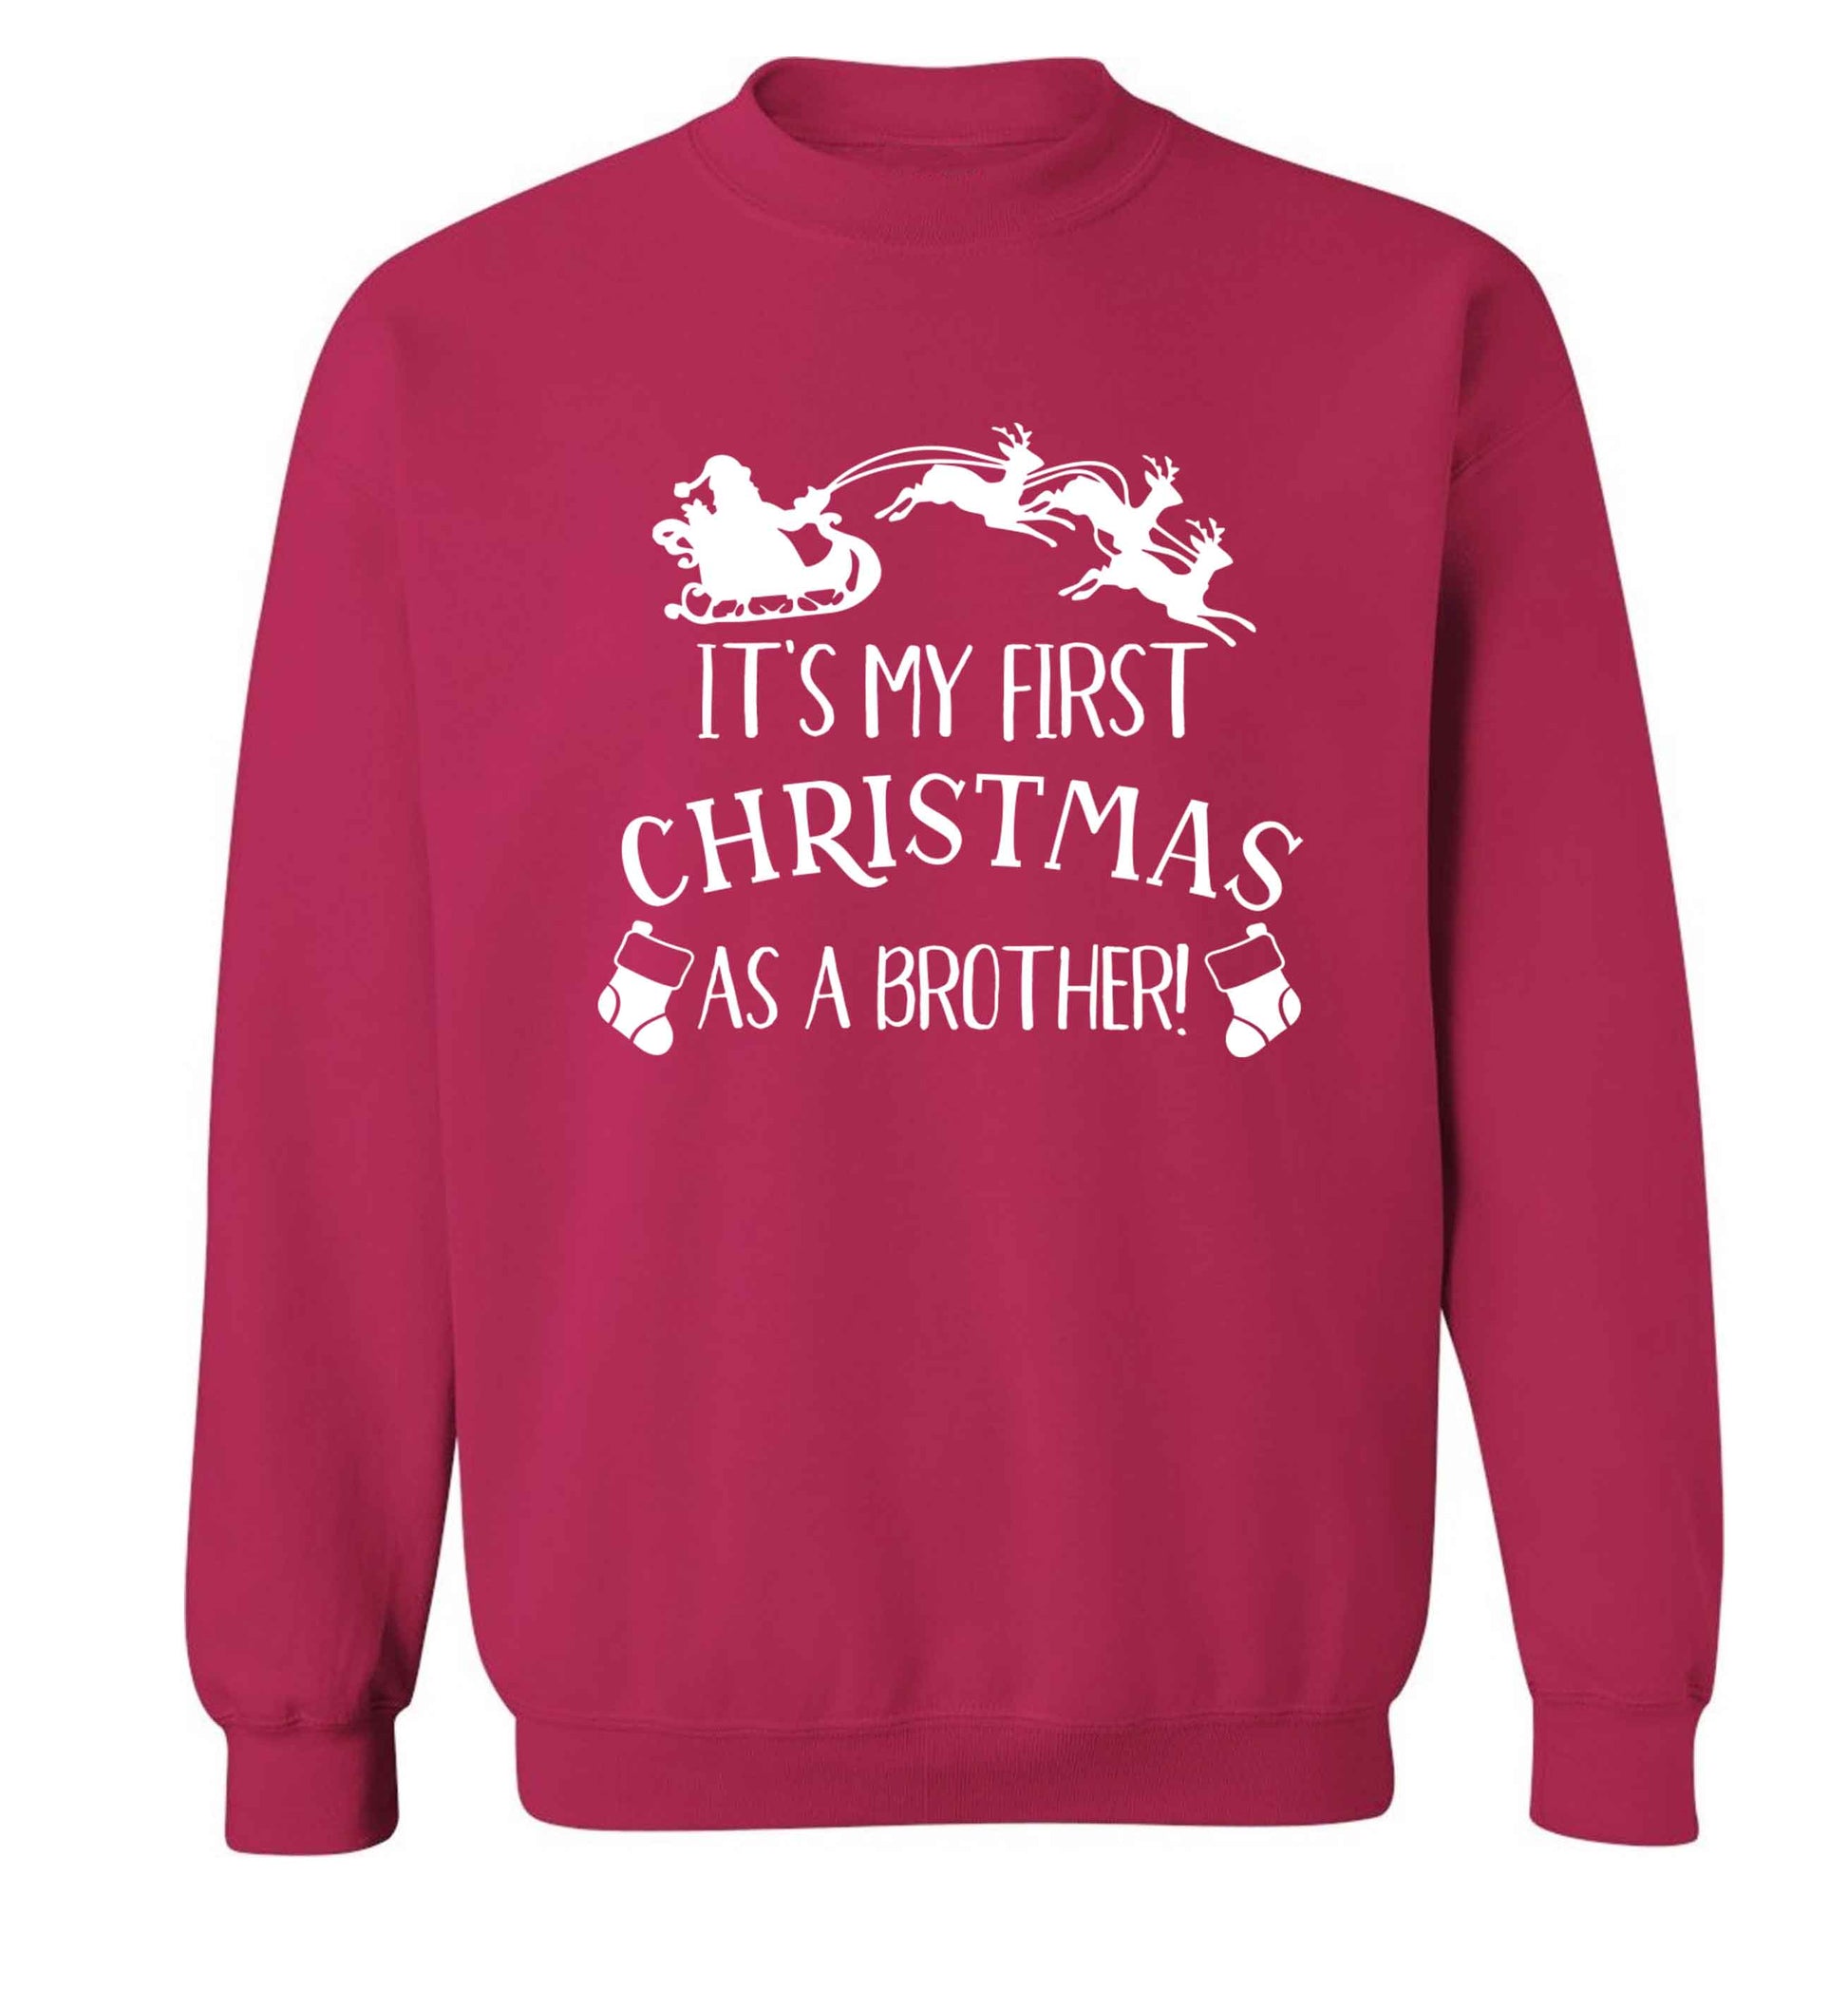 It's my first Christmas as a brother! Adult's unisex pink Sweater 2XL